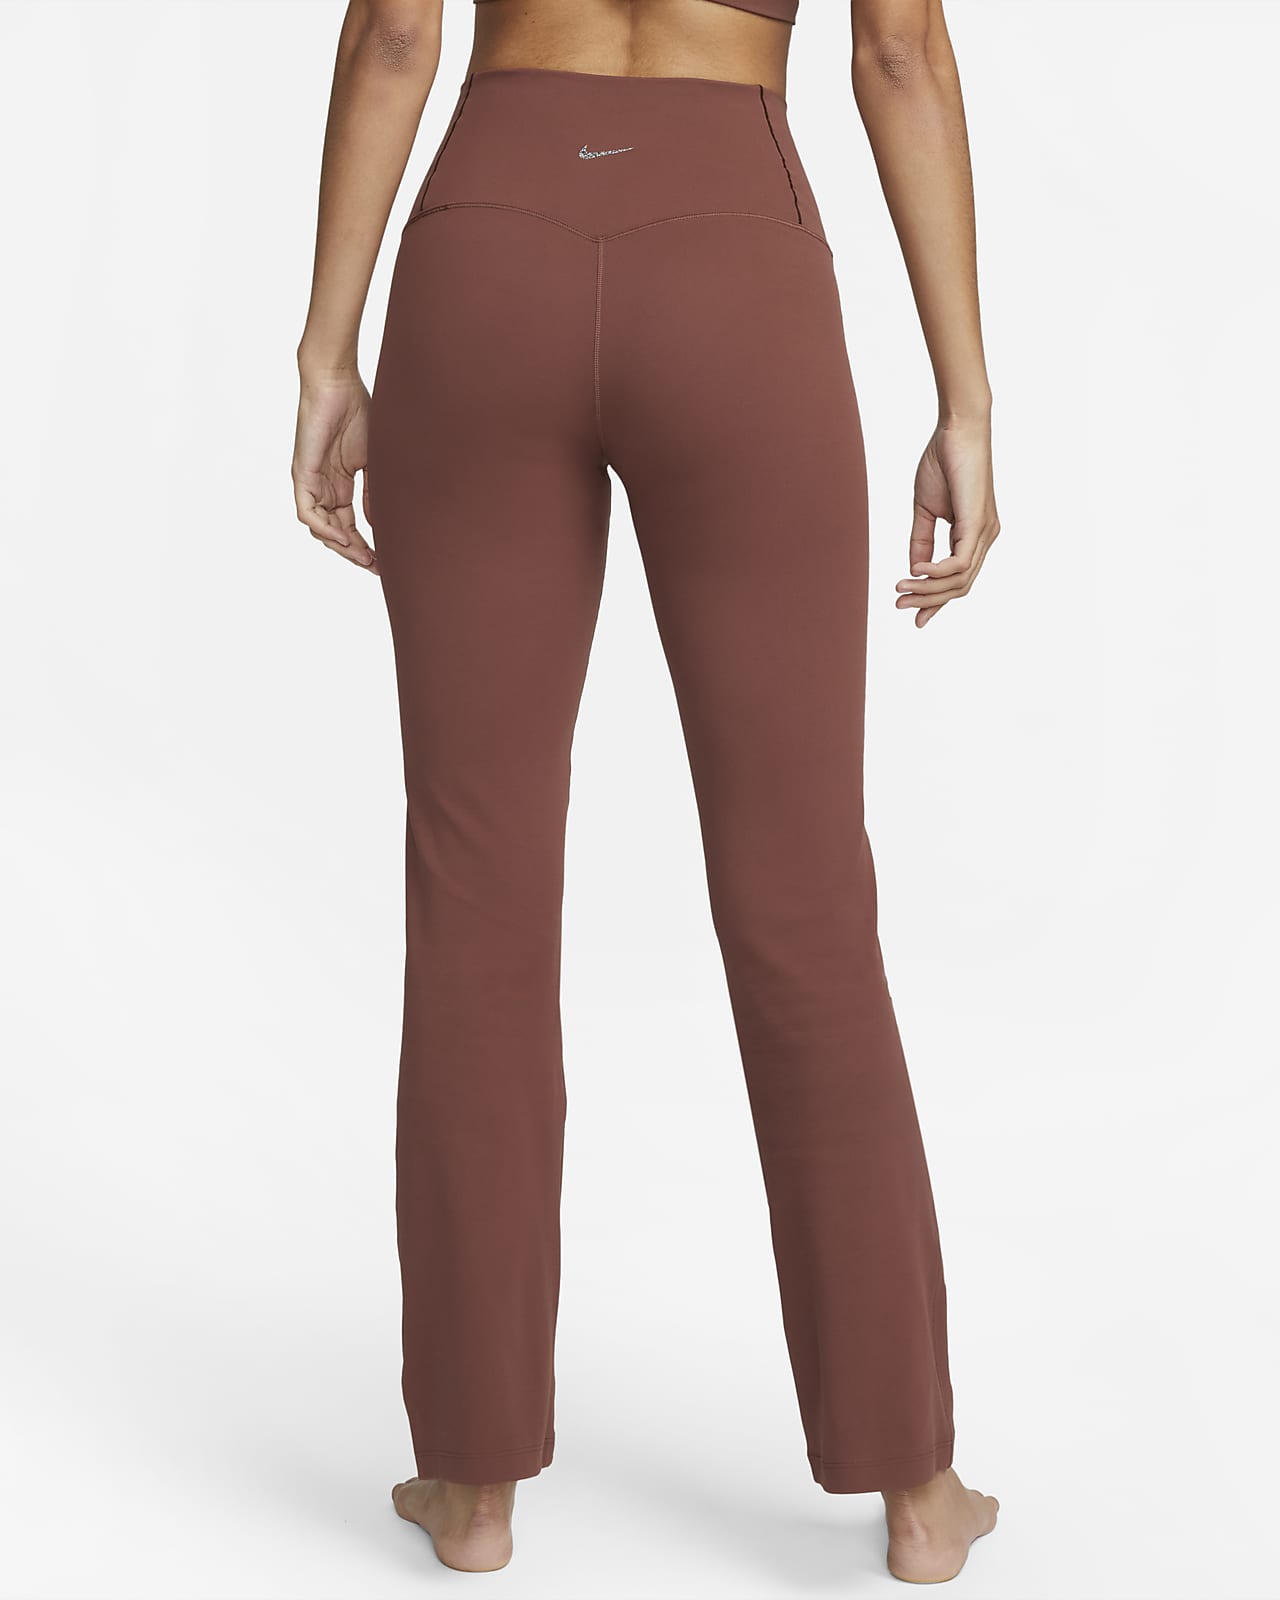 Yummy Material Flare Pants Solid Burgundy with Black Stripes - Its All  Leggings